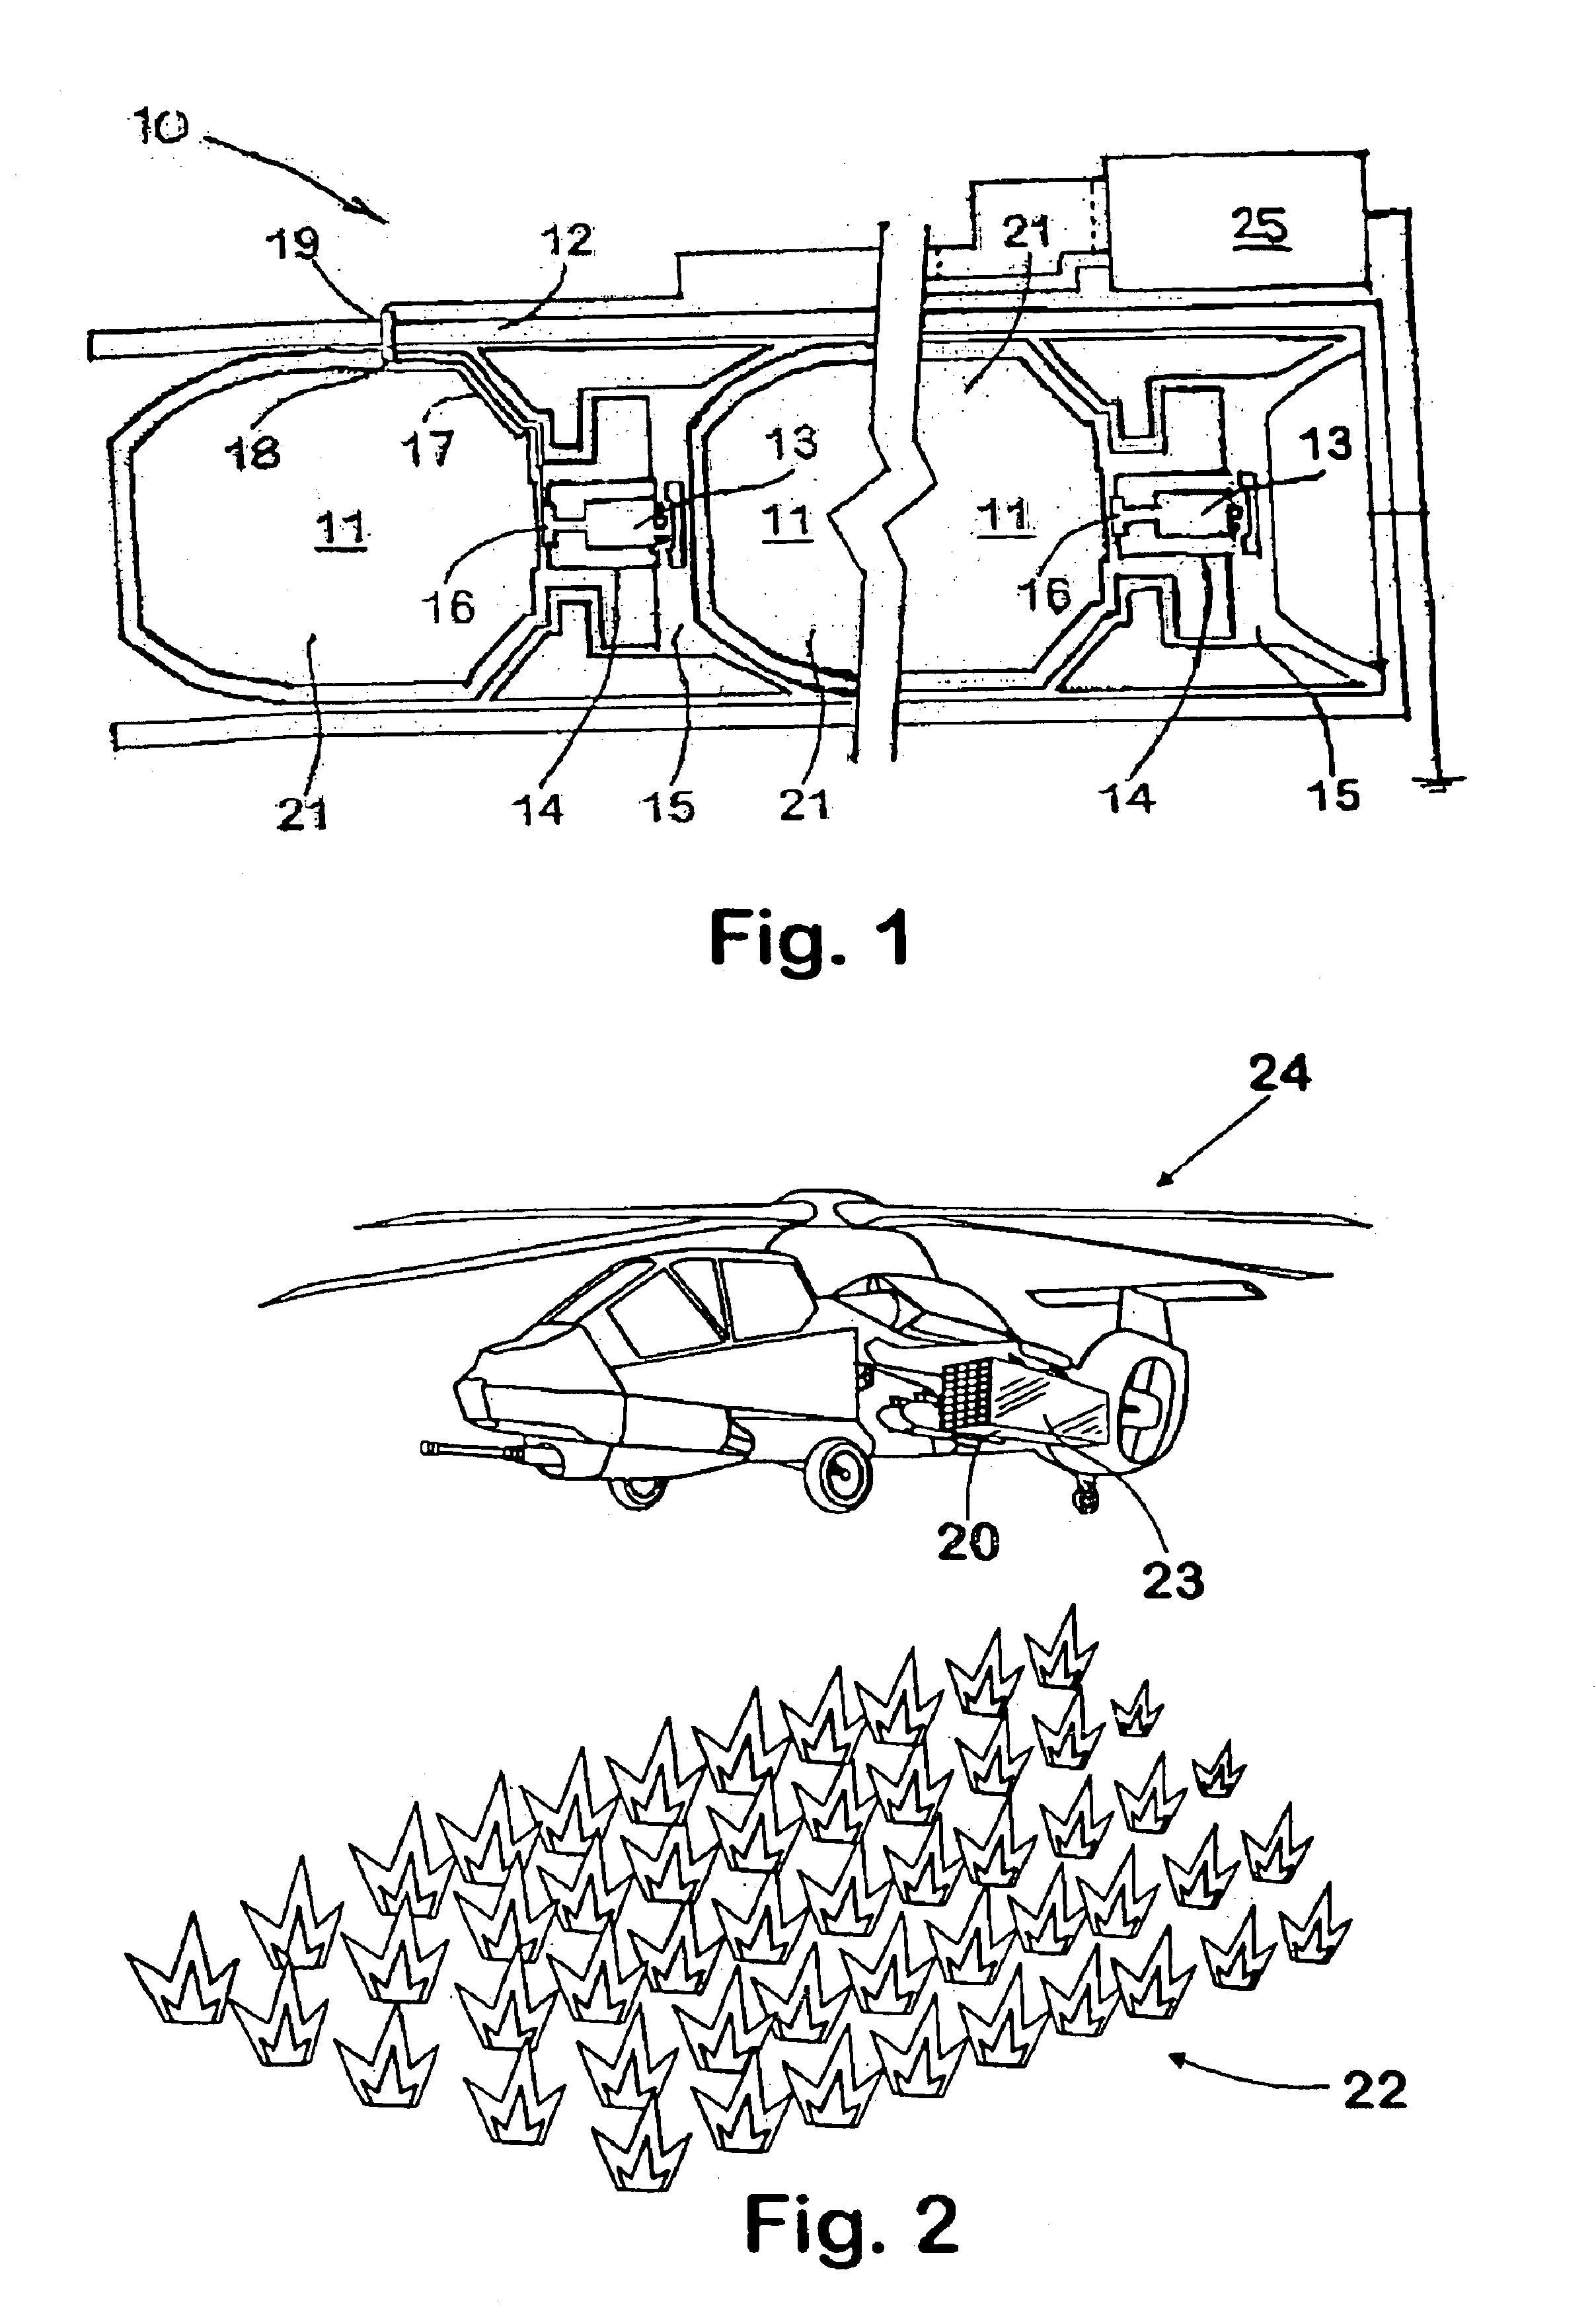 Projectile launching apparatus and methods for fire fighting